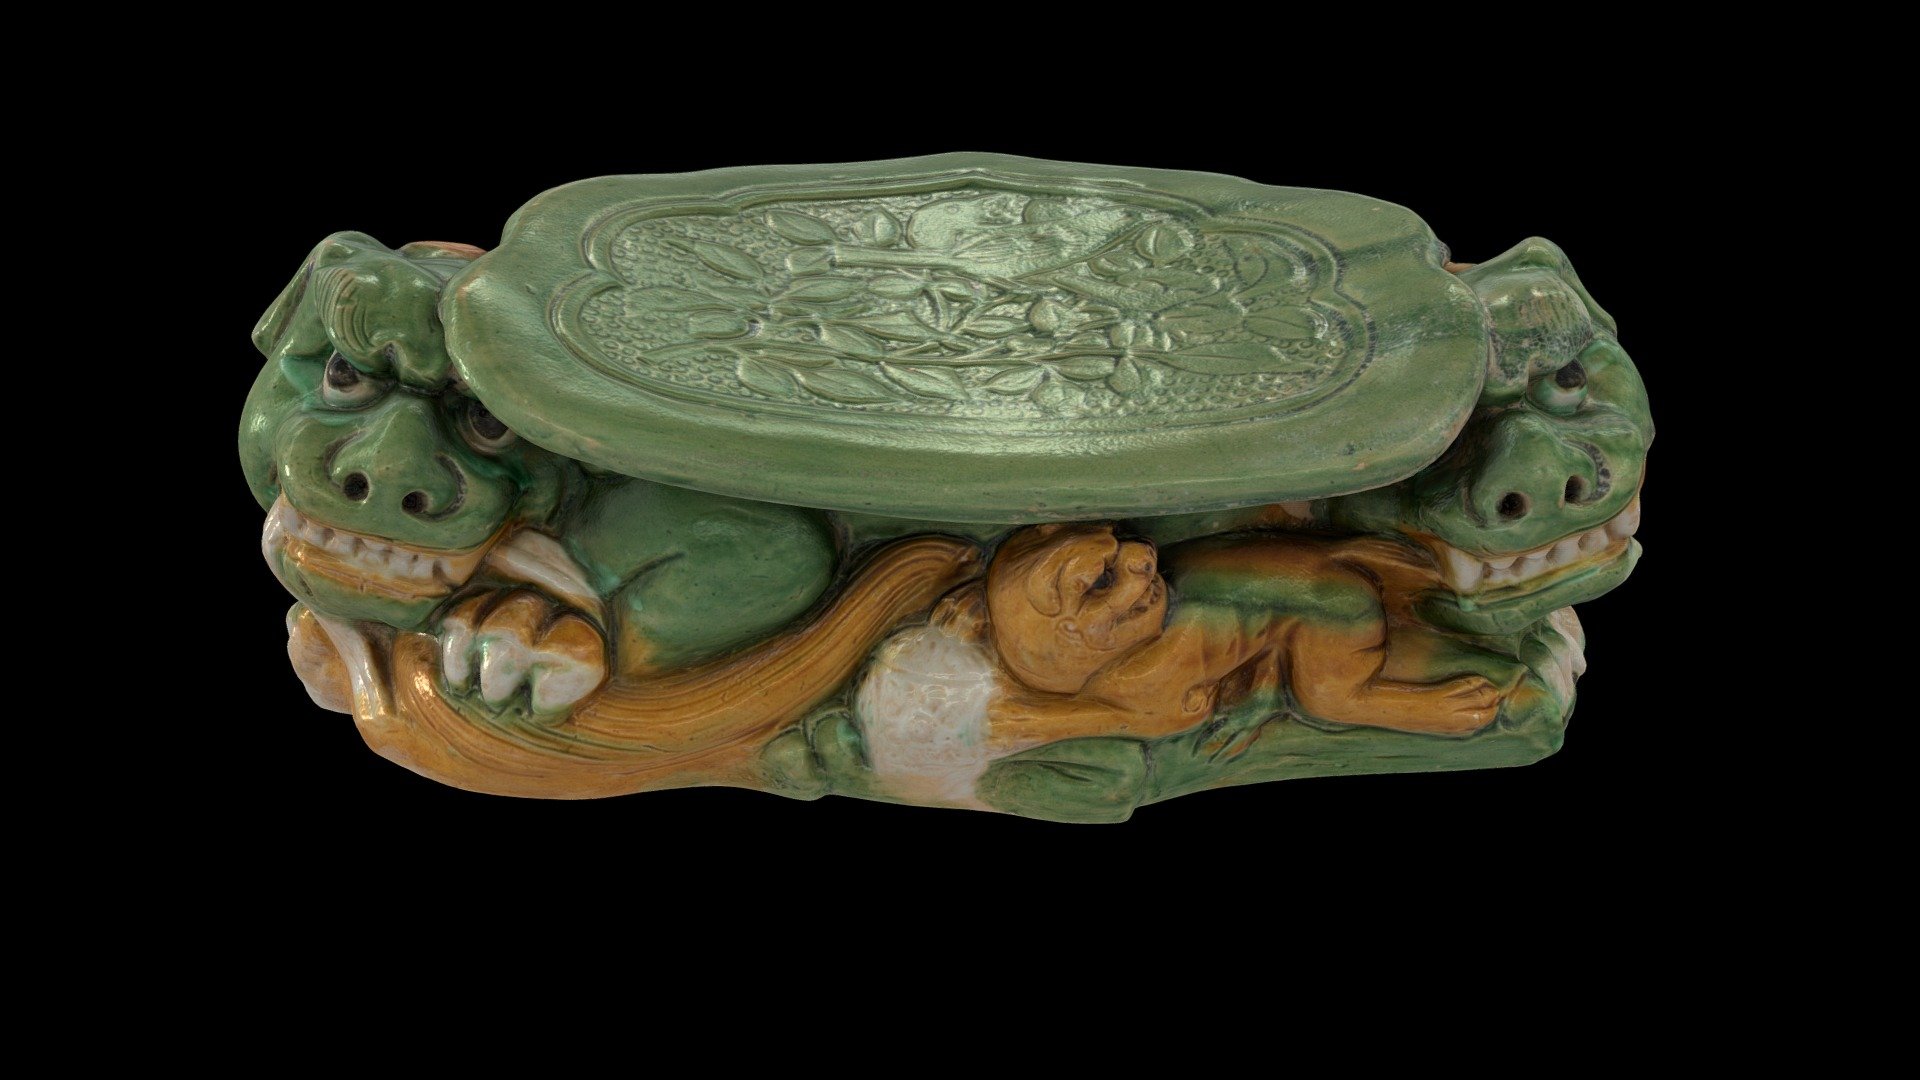 You can copy, modify, and distribute this work, even for commercial purposes, all without asking permission. Learn more about the Cleveland Museum of Art’s Open Access initiative: http://www.clevelandart.org/open-access-faqs

Headrest with Three Lions (916-1125). China, Liao dynasty (916-1125). Glazed earthenware, sancai (three-color ware). Overall: 13.4 x 37.9 x 18.2 cm (5 1/4 x 14 15/16 x 7 3/16 in.). Gift of Donna and James Reid, 2017.15 

Learn more on The Cleveland Museum of Art's Collection Online: http://www.clevelandart.org/art/2017.15 - 2017.15 Headrest With Three Lions - Download Free 3D model by Cleveland Museum of Art (@clevelandart) 3d model